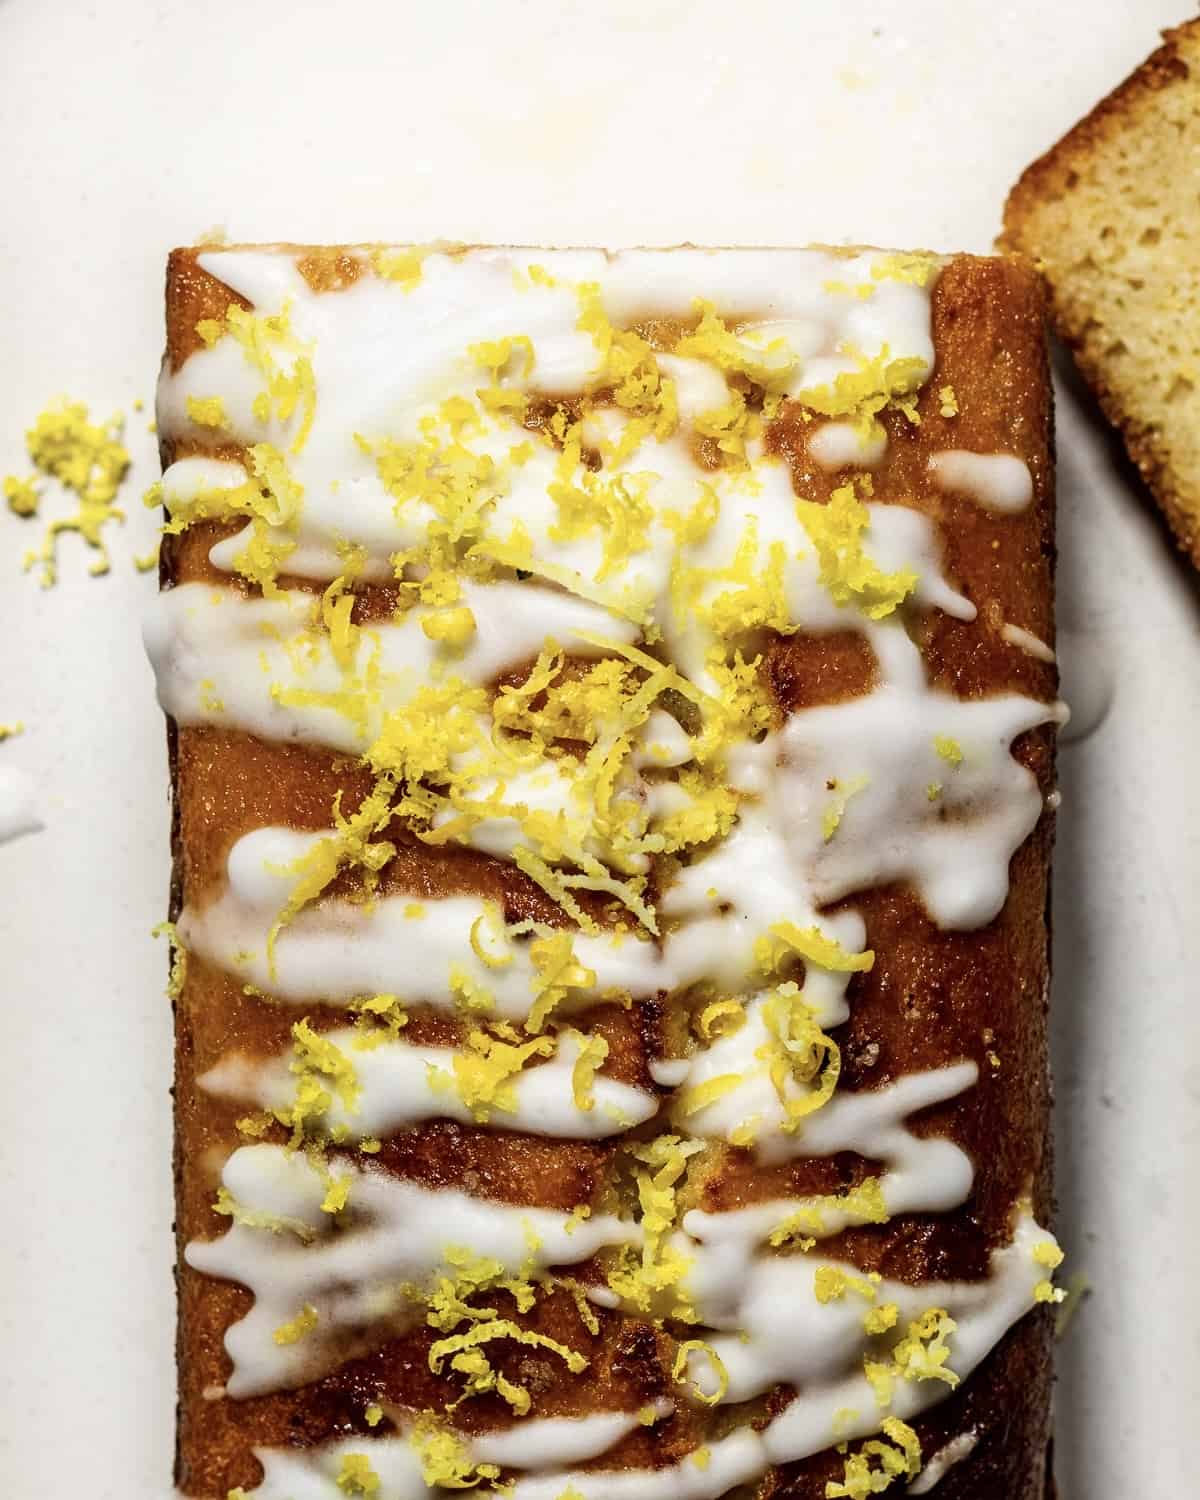 A lemon drizzle loaf cake with lemon icing and lemon zest photographed from above.